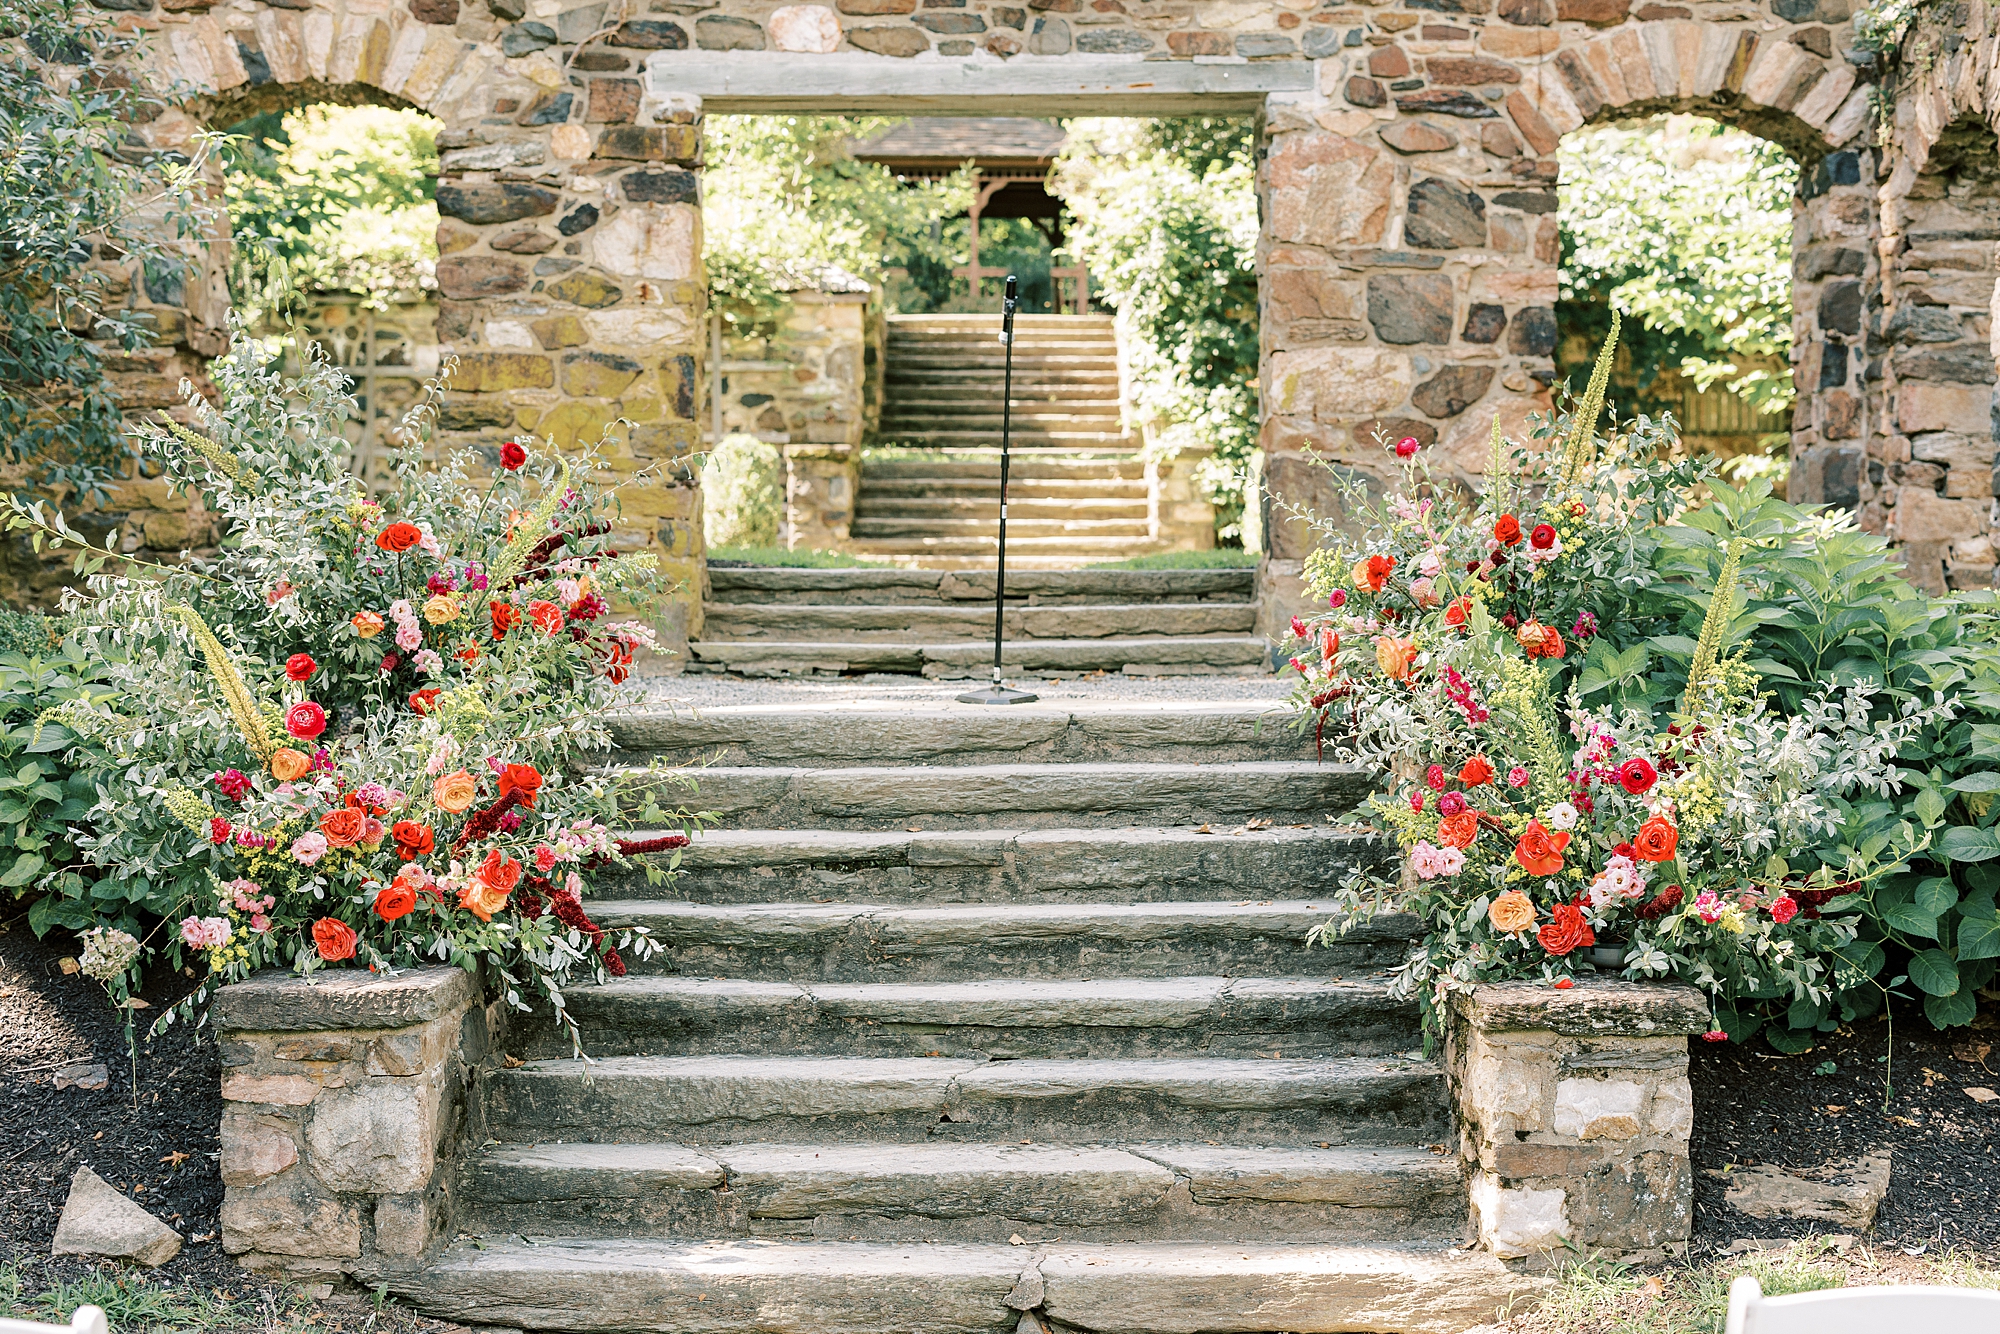 summer wedding ceremony in stone arch of gardens at Parque Ridley Creek